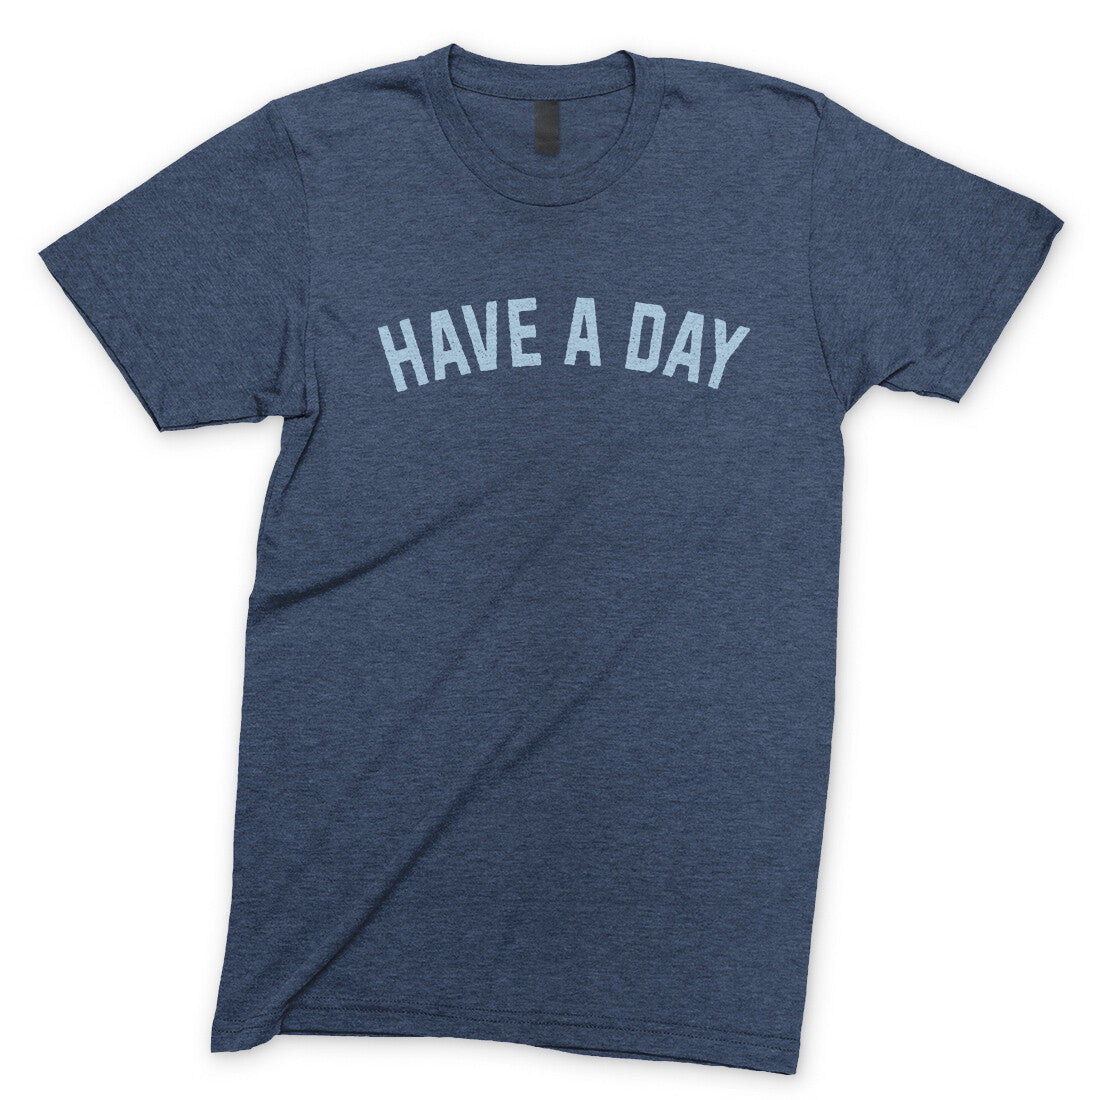 Have a Day in Navy Heather Color